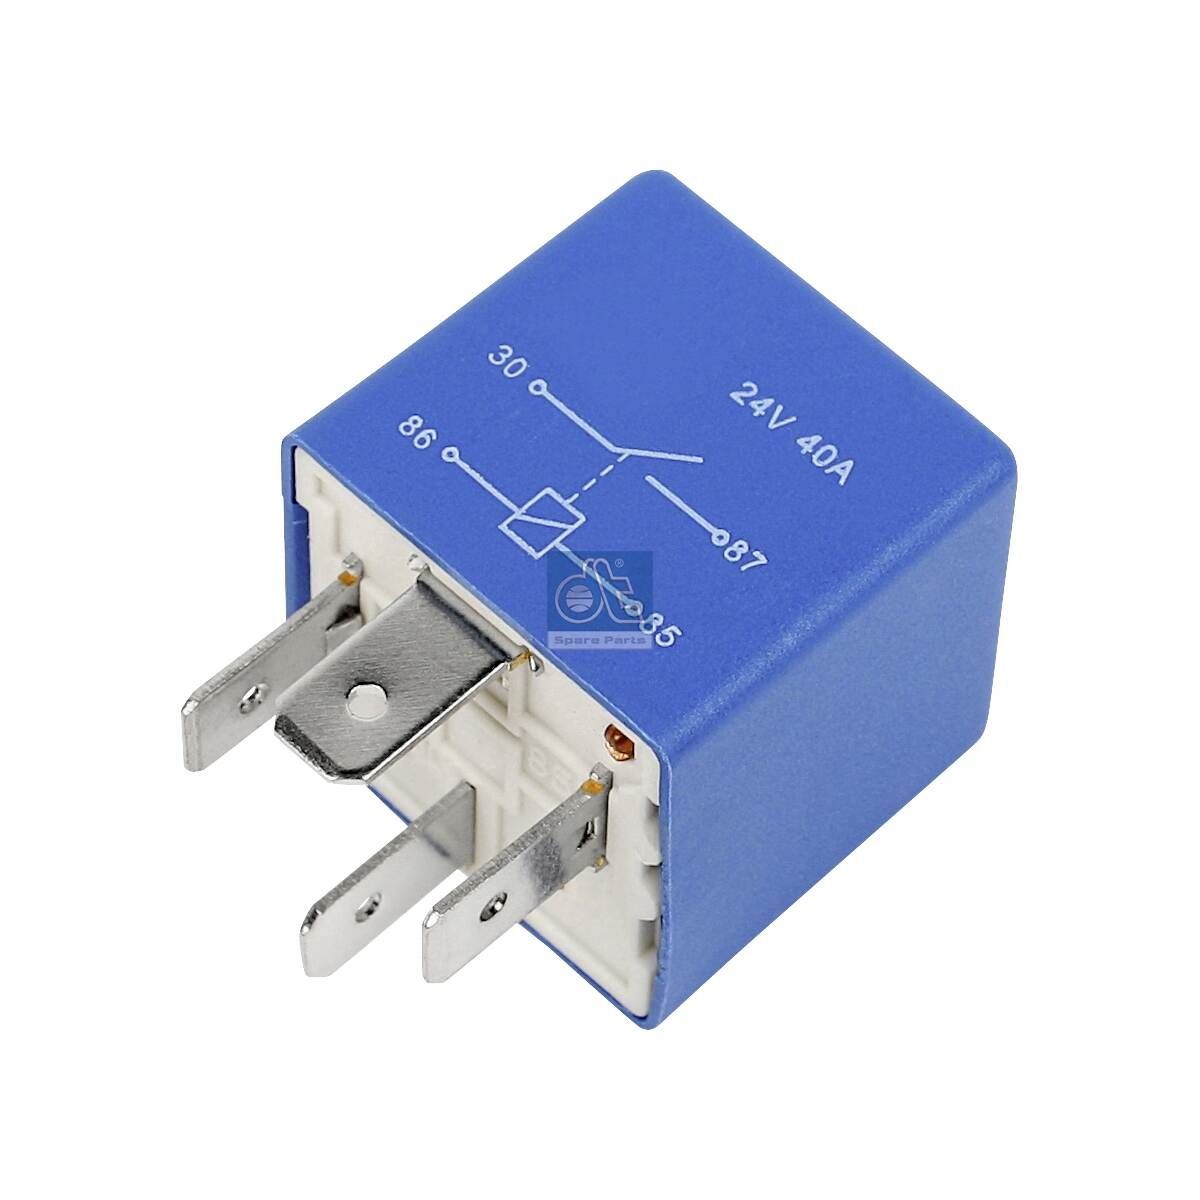 Multi-functional relay DT Spare Parts 24V, 40A - 4.62061